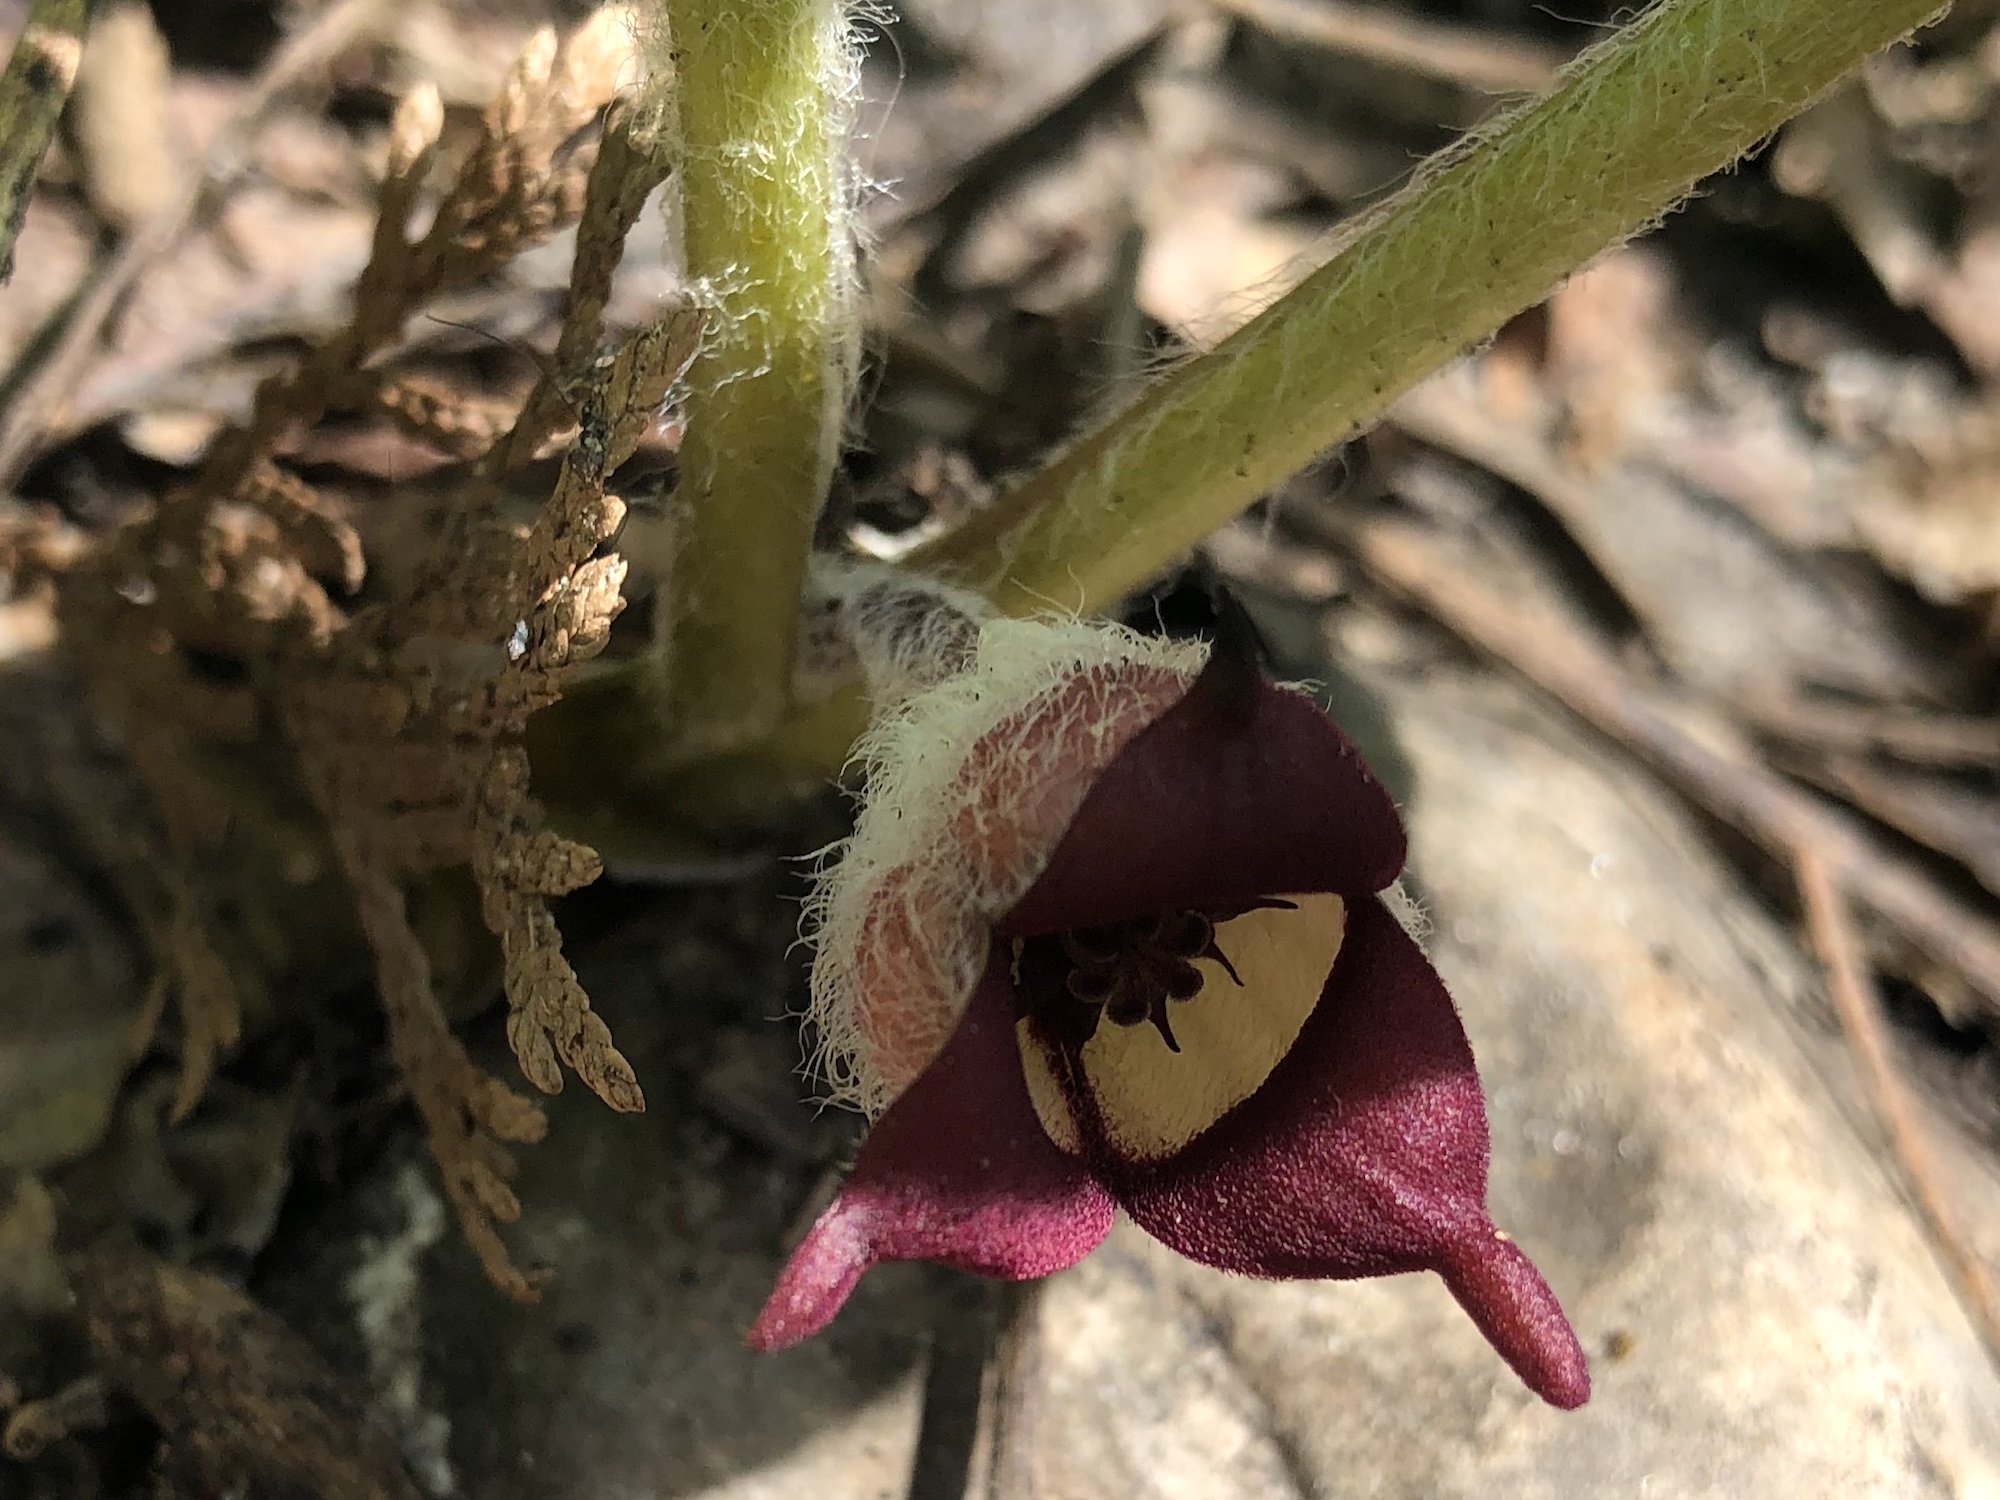 Wild Ginger flower just budding near Agawa Path in Madison, Wisconsin on April 16, 2021.